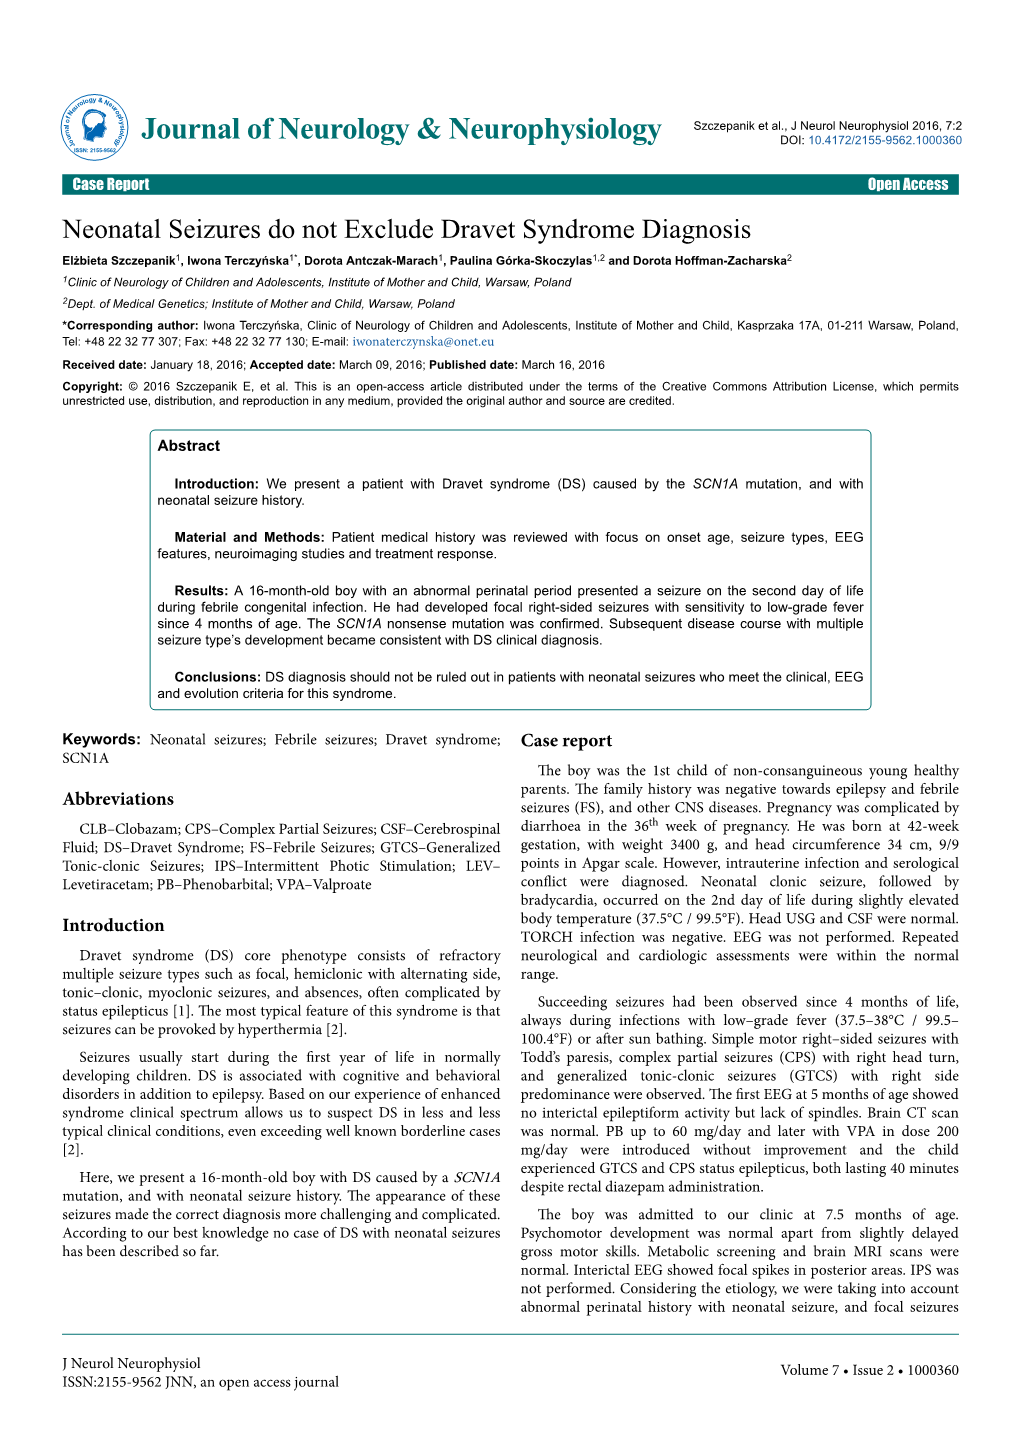 Neonatal Seizures Do Not Exclude Dravet Syndrome Diagnosis